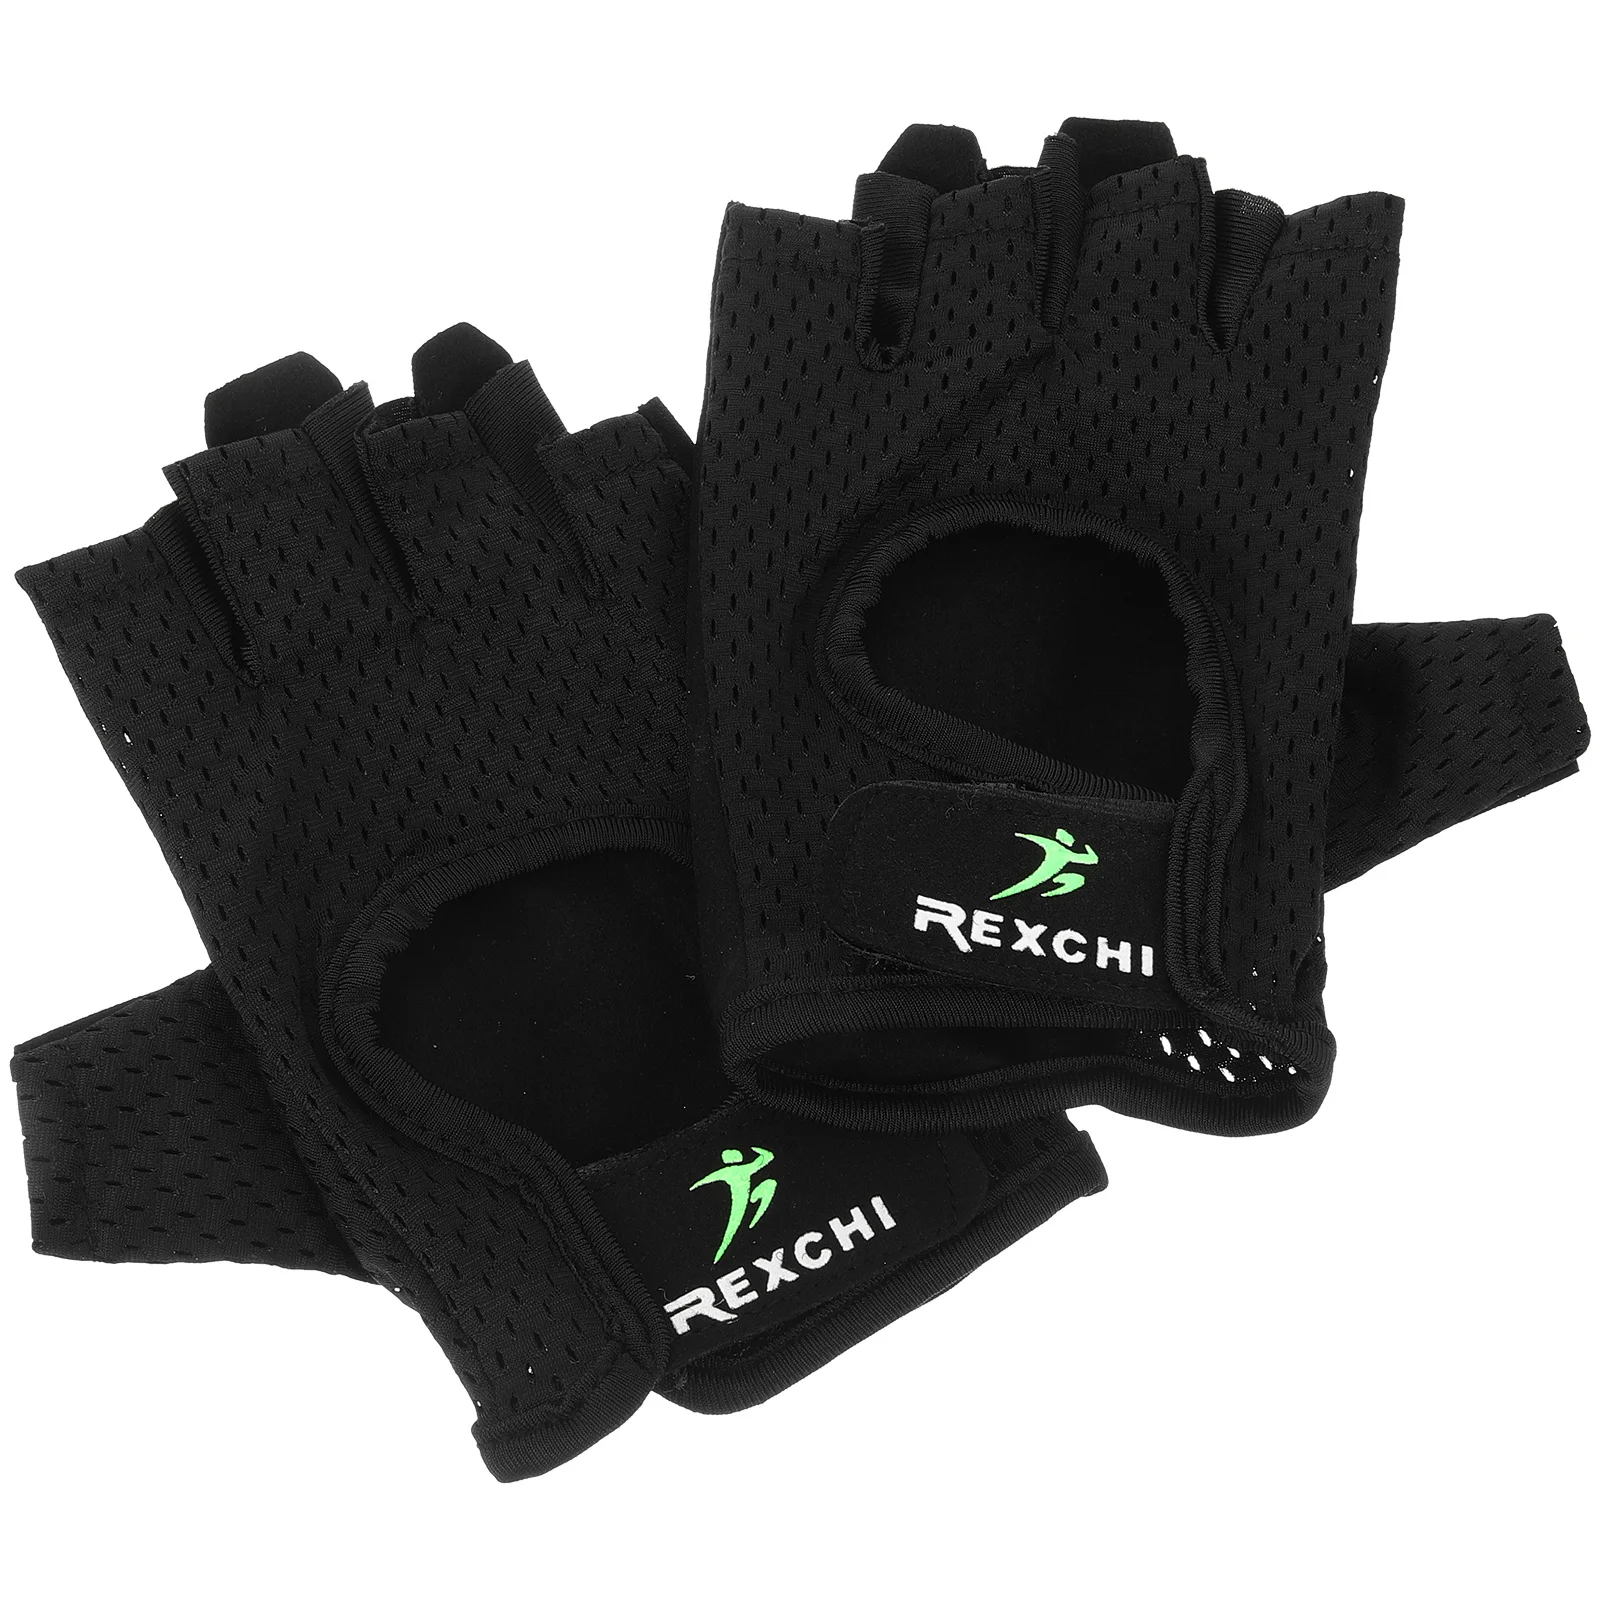 

Black Gloves Bicycling Mitten Outdoor Riding Racing Car Mountain Bike Skid-proof